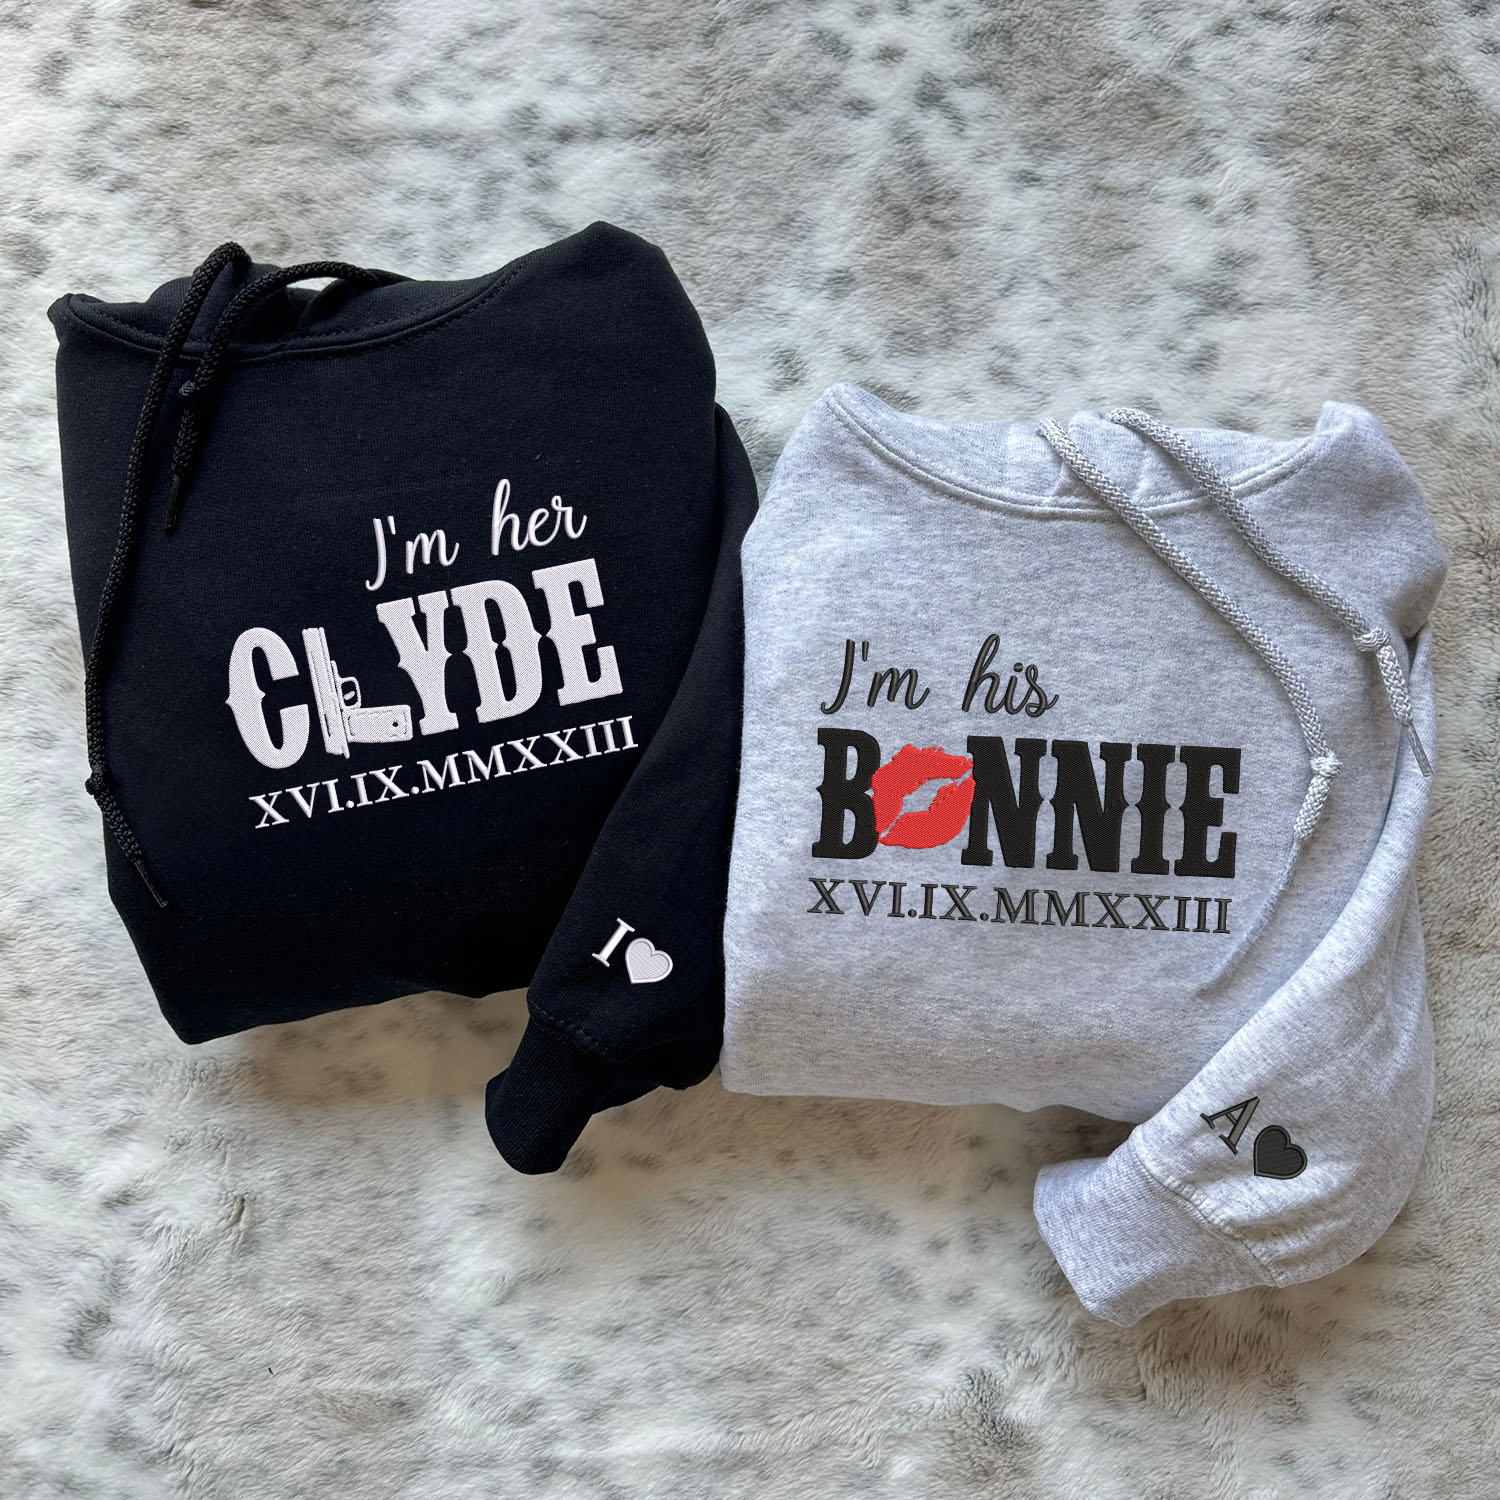 Embroidered His Bonnie Her Clyde Hoodies or Sweatshirts with Roman Numerals